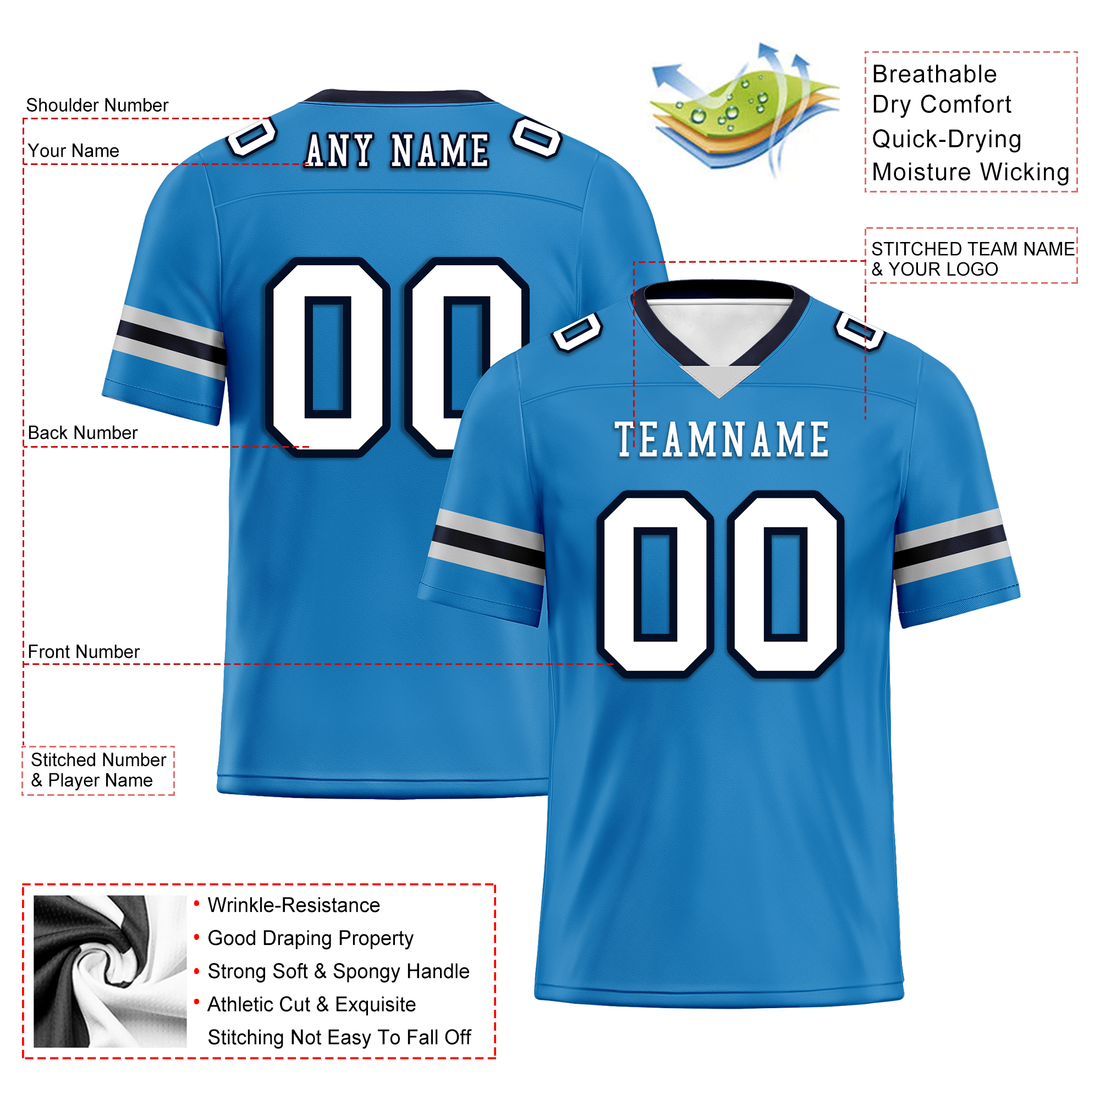 Custom Blue White Classic Style Personalized Authentic Football Jersey FBJ02-bd0a700c